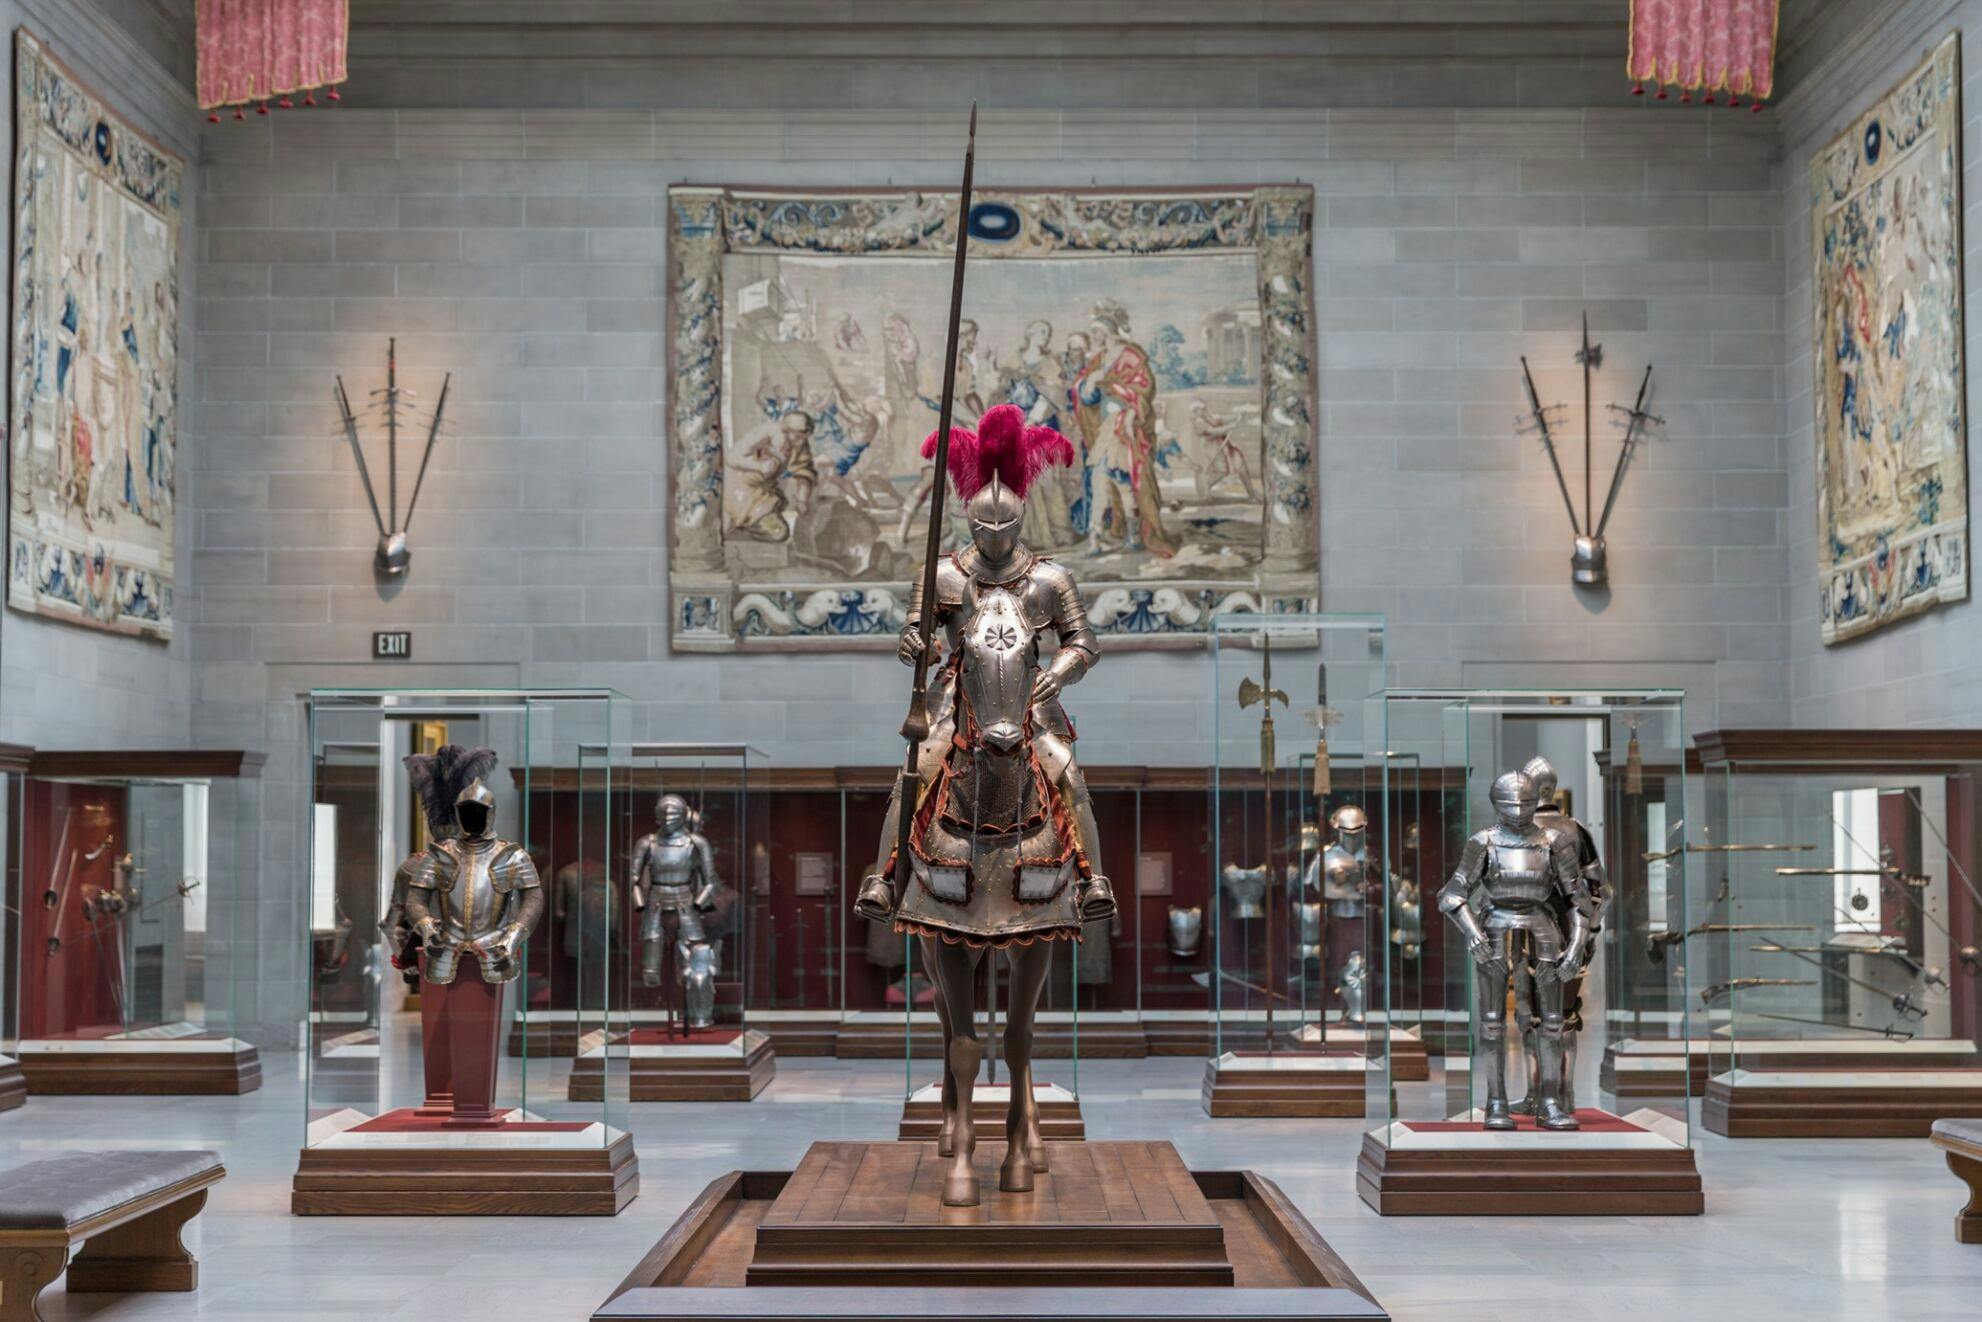 CMA's armor court gallery, displaying many suits of armor